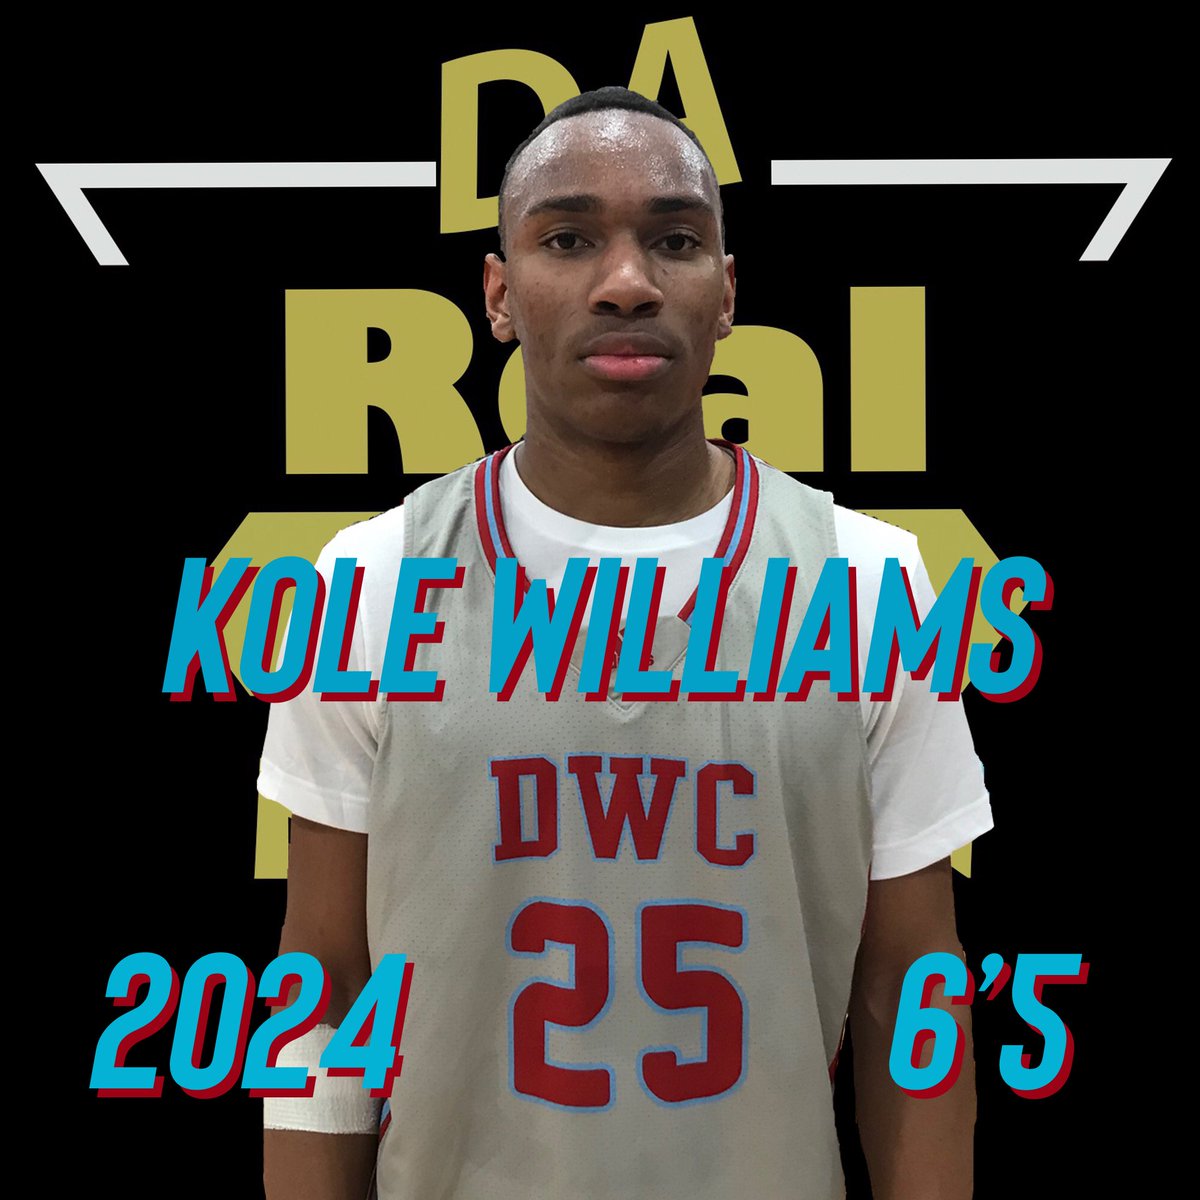 @Carter__Hoops @btwbasketball @0nlyDaniel @Carter__Hoops vs @btwbasketball RECAP: COWBOYS guard @theKoleWilliams had 18pts and they were about as man’ish as could get.. he’s physical getting to his spots; finishes with either hand; good jumper, dependable bucket getter; #DaREALtalkNation